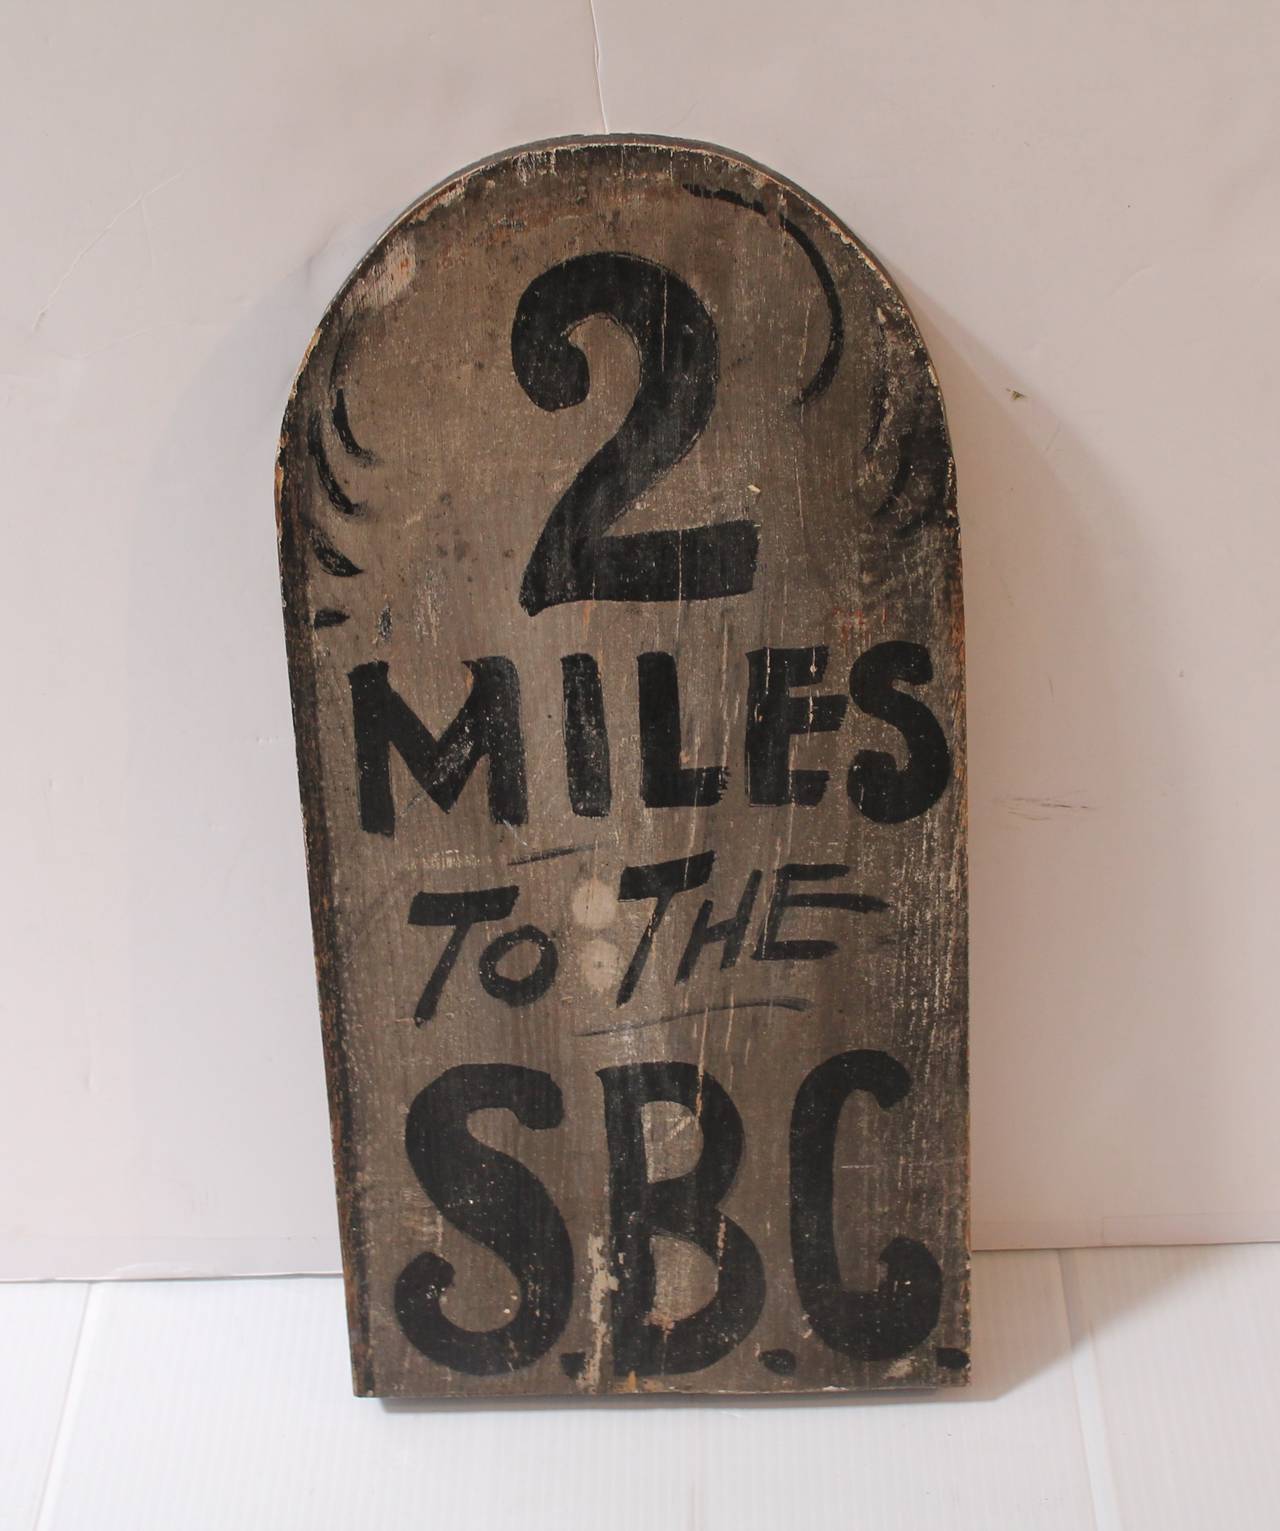 This plank wood and all original painted trade sign was found in New England and is double sided. It is in great condition with minor paint loss consistent with age and wear. Great addition to any Folk Art or Americana collection.